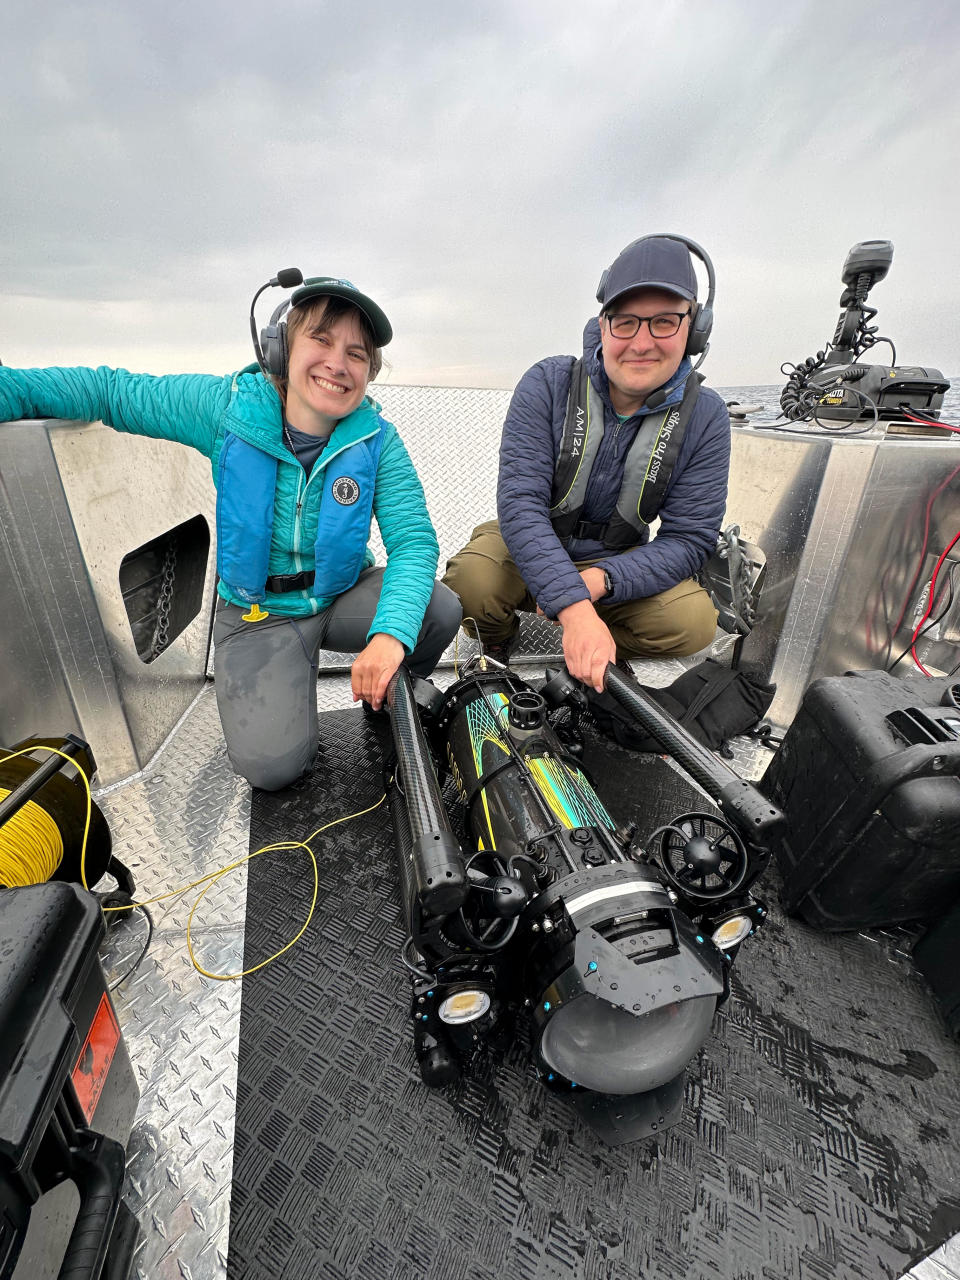 Yvonne Drebert (left), and Zach Melnick (right), moments after the discovery of the Africa, with their robot, Kiyi (center). / Credit: Esme Batten.